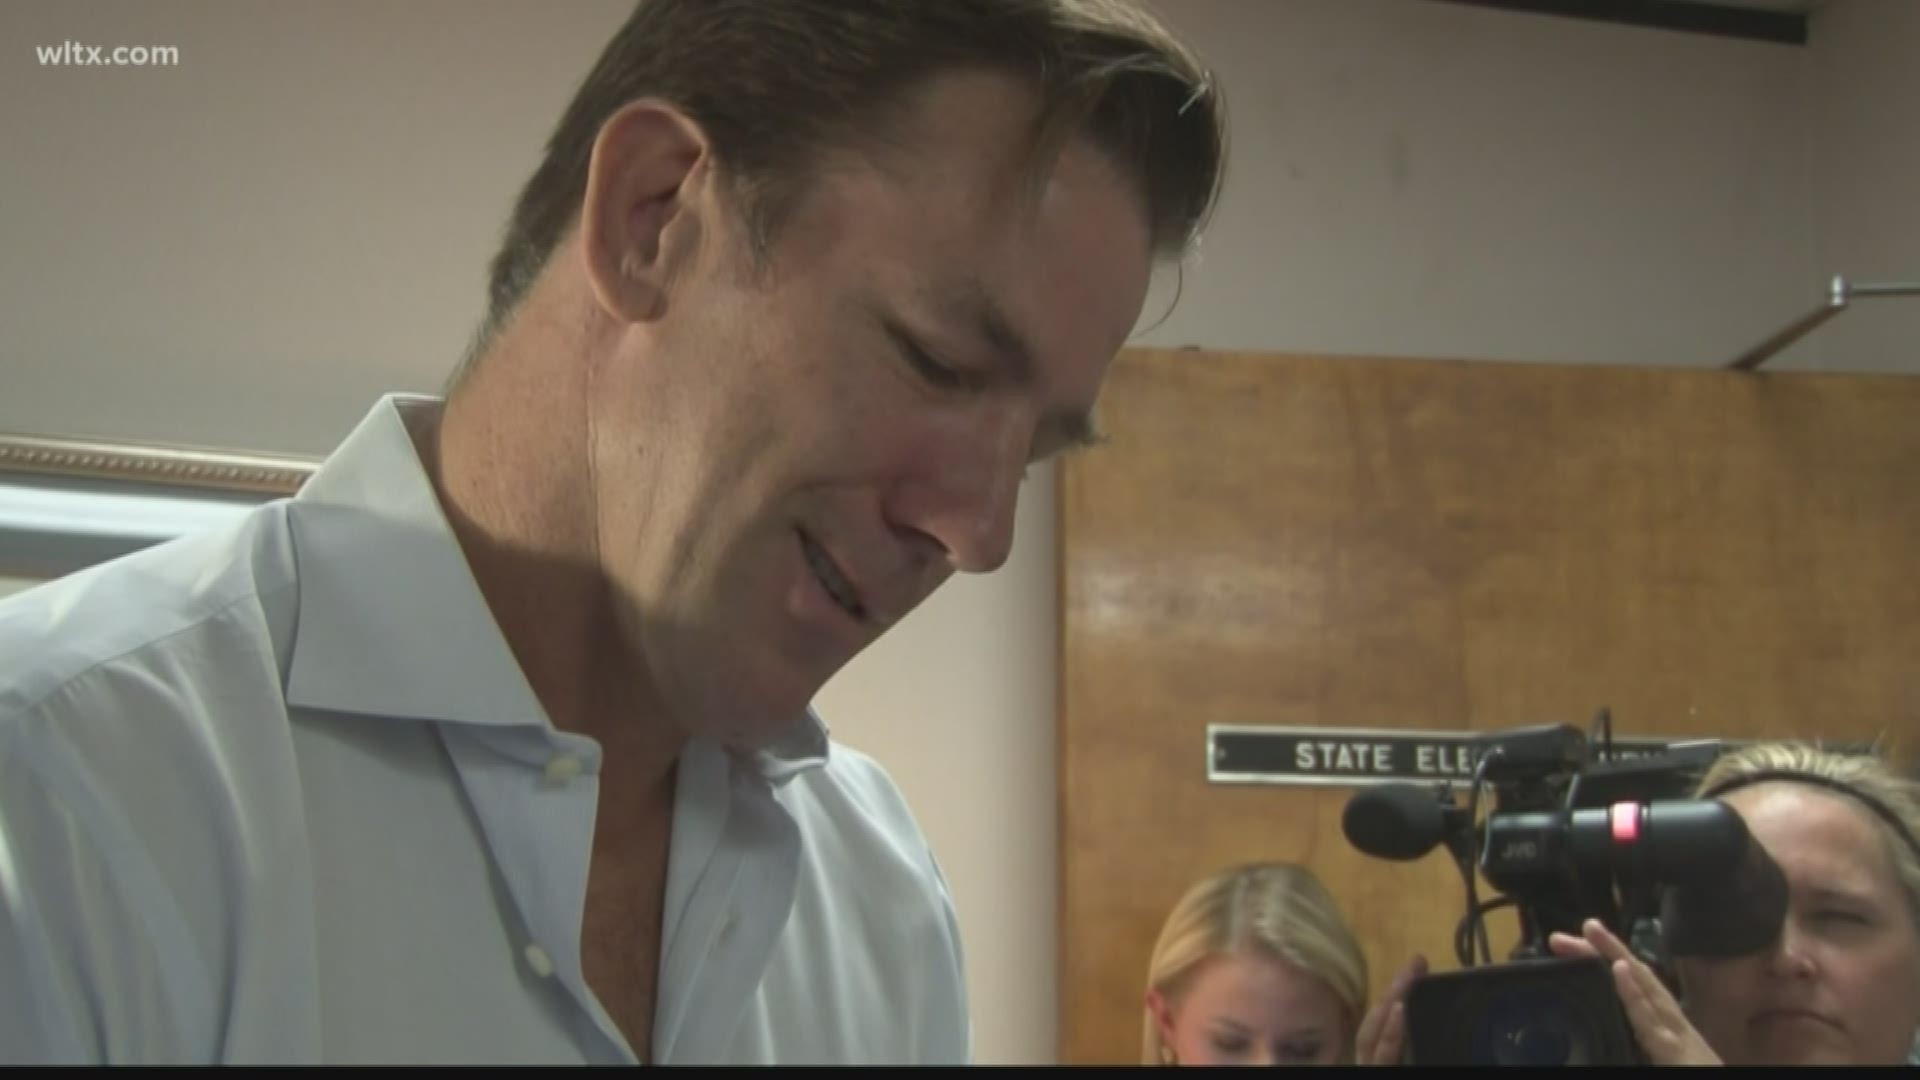 Former state treasurer Thomas Ravenel has been fined $500 after taking a plea deal to charges he assaulted a former nanny.